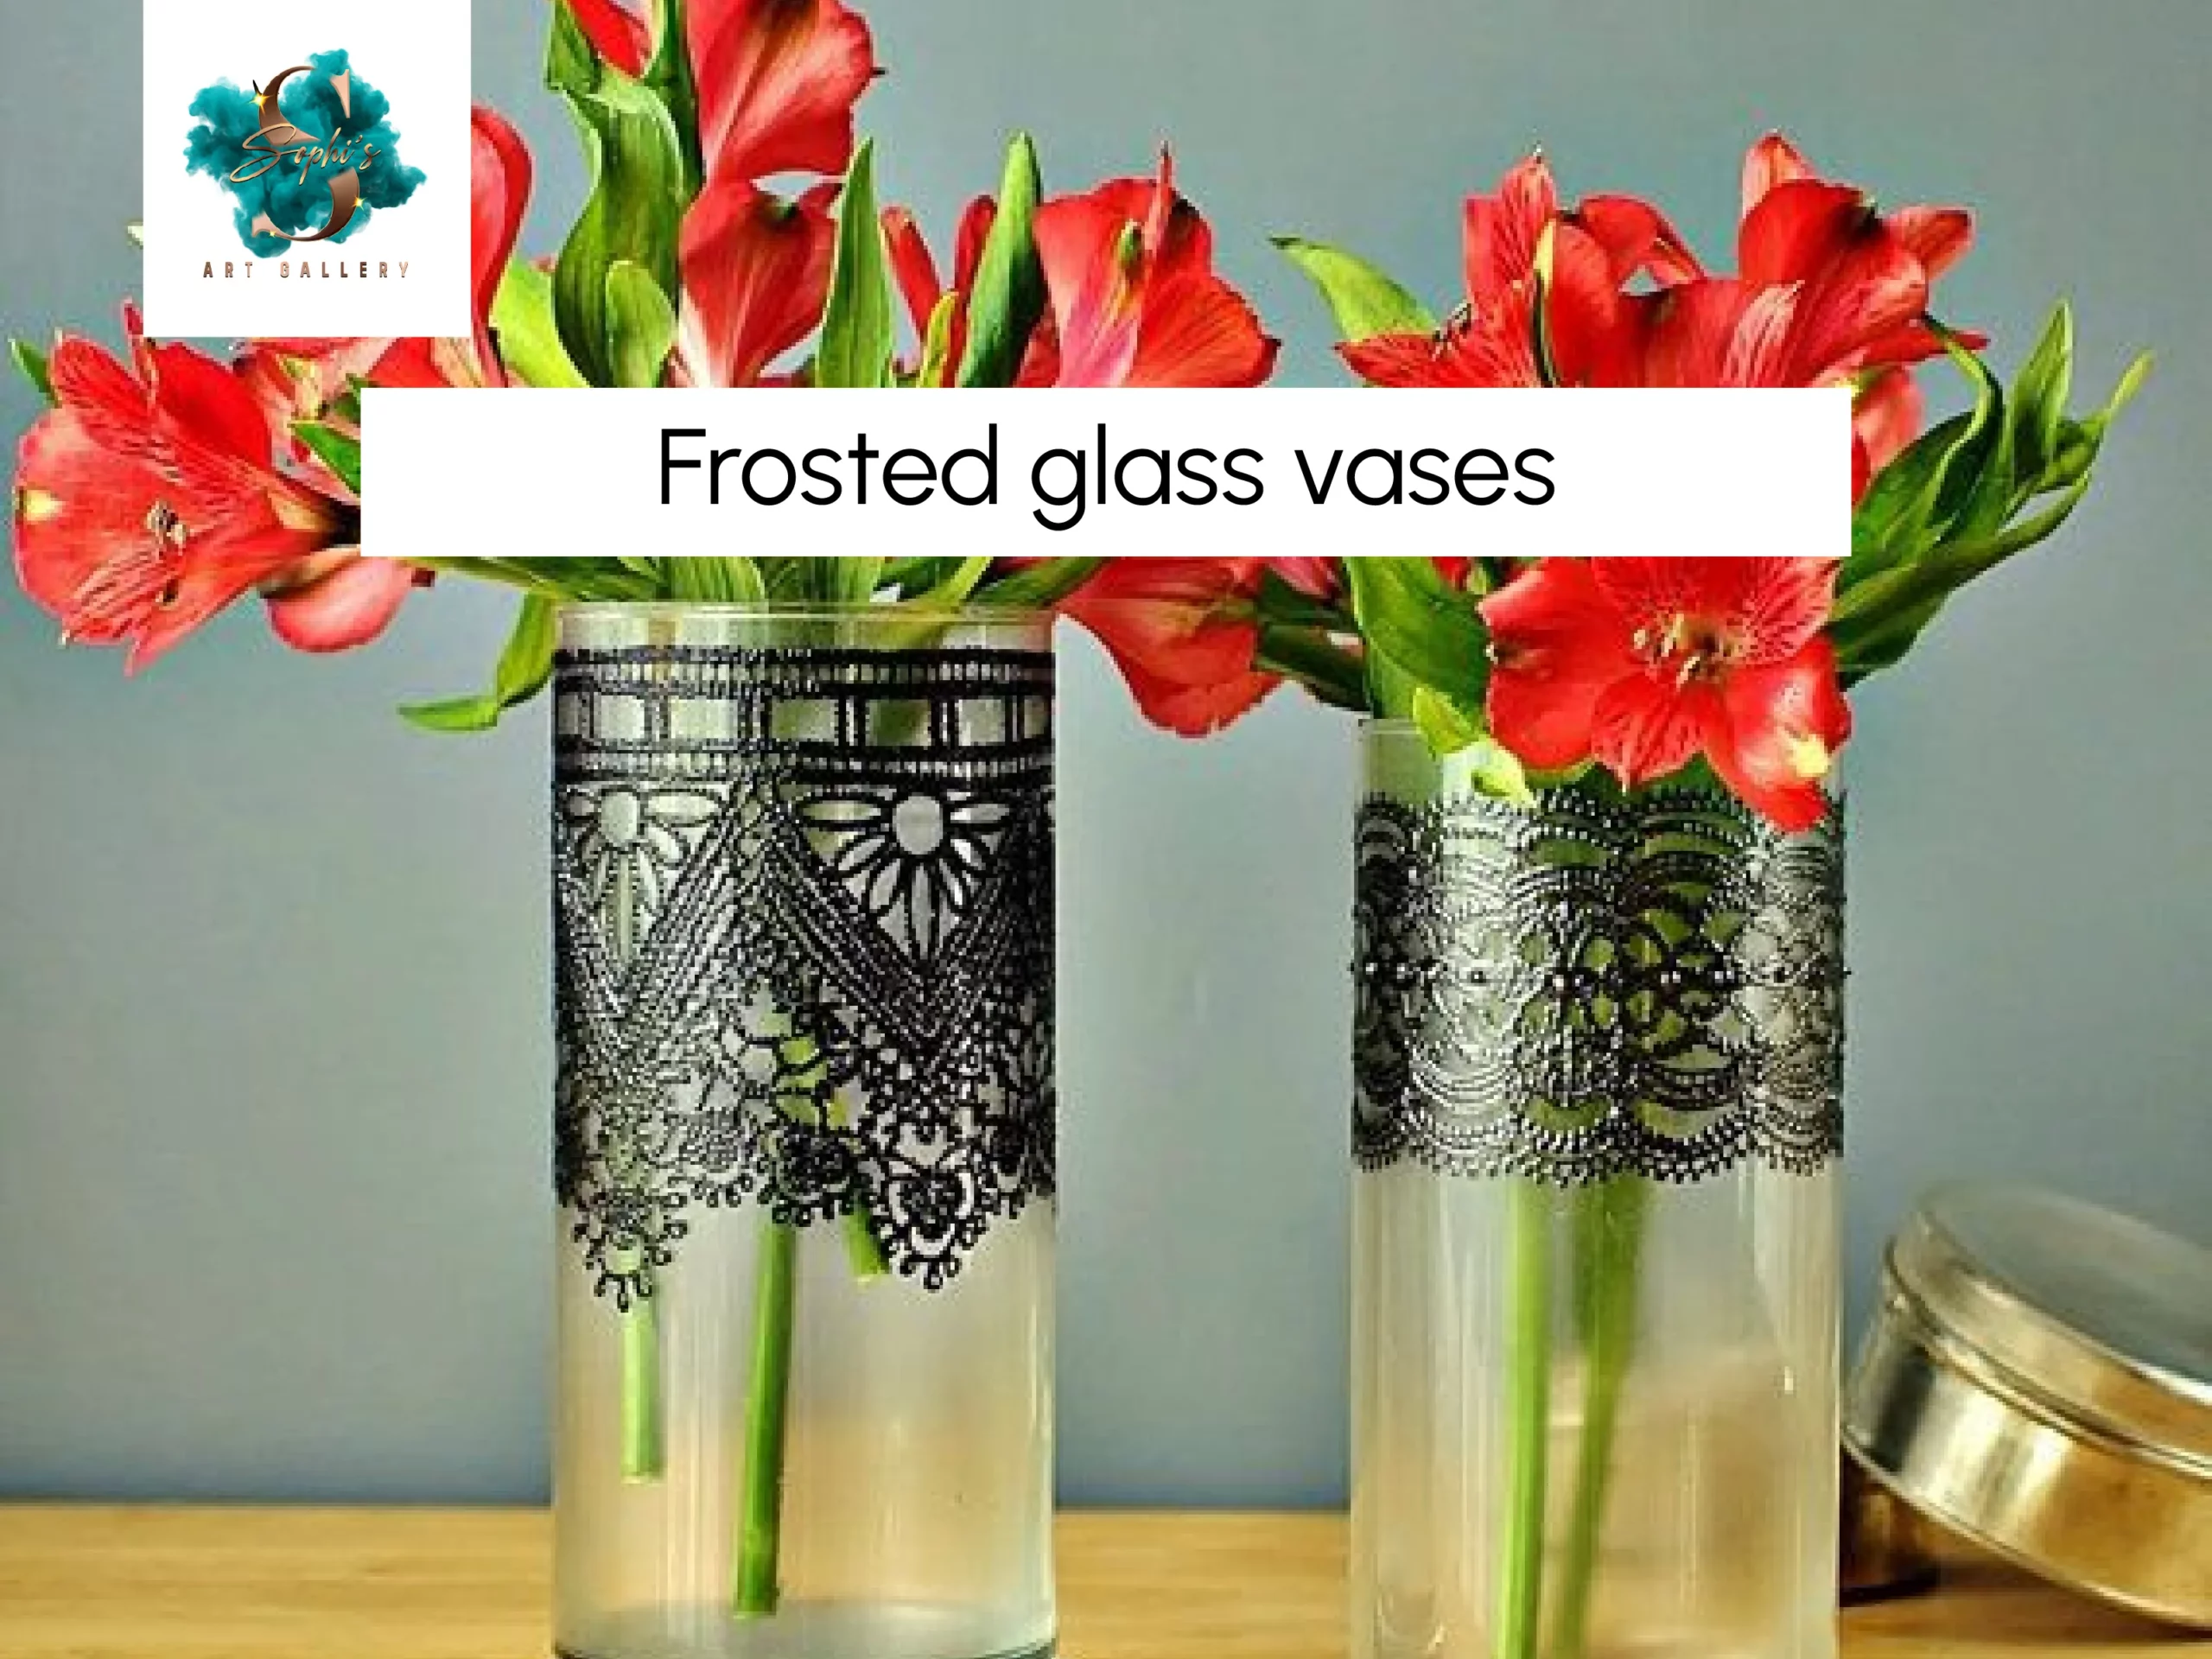 Frosted glass vases